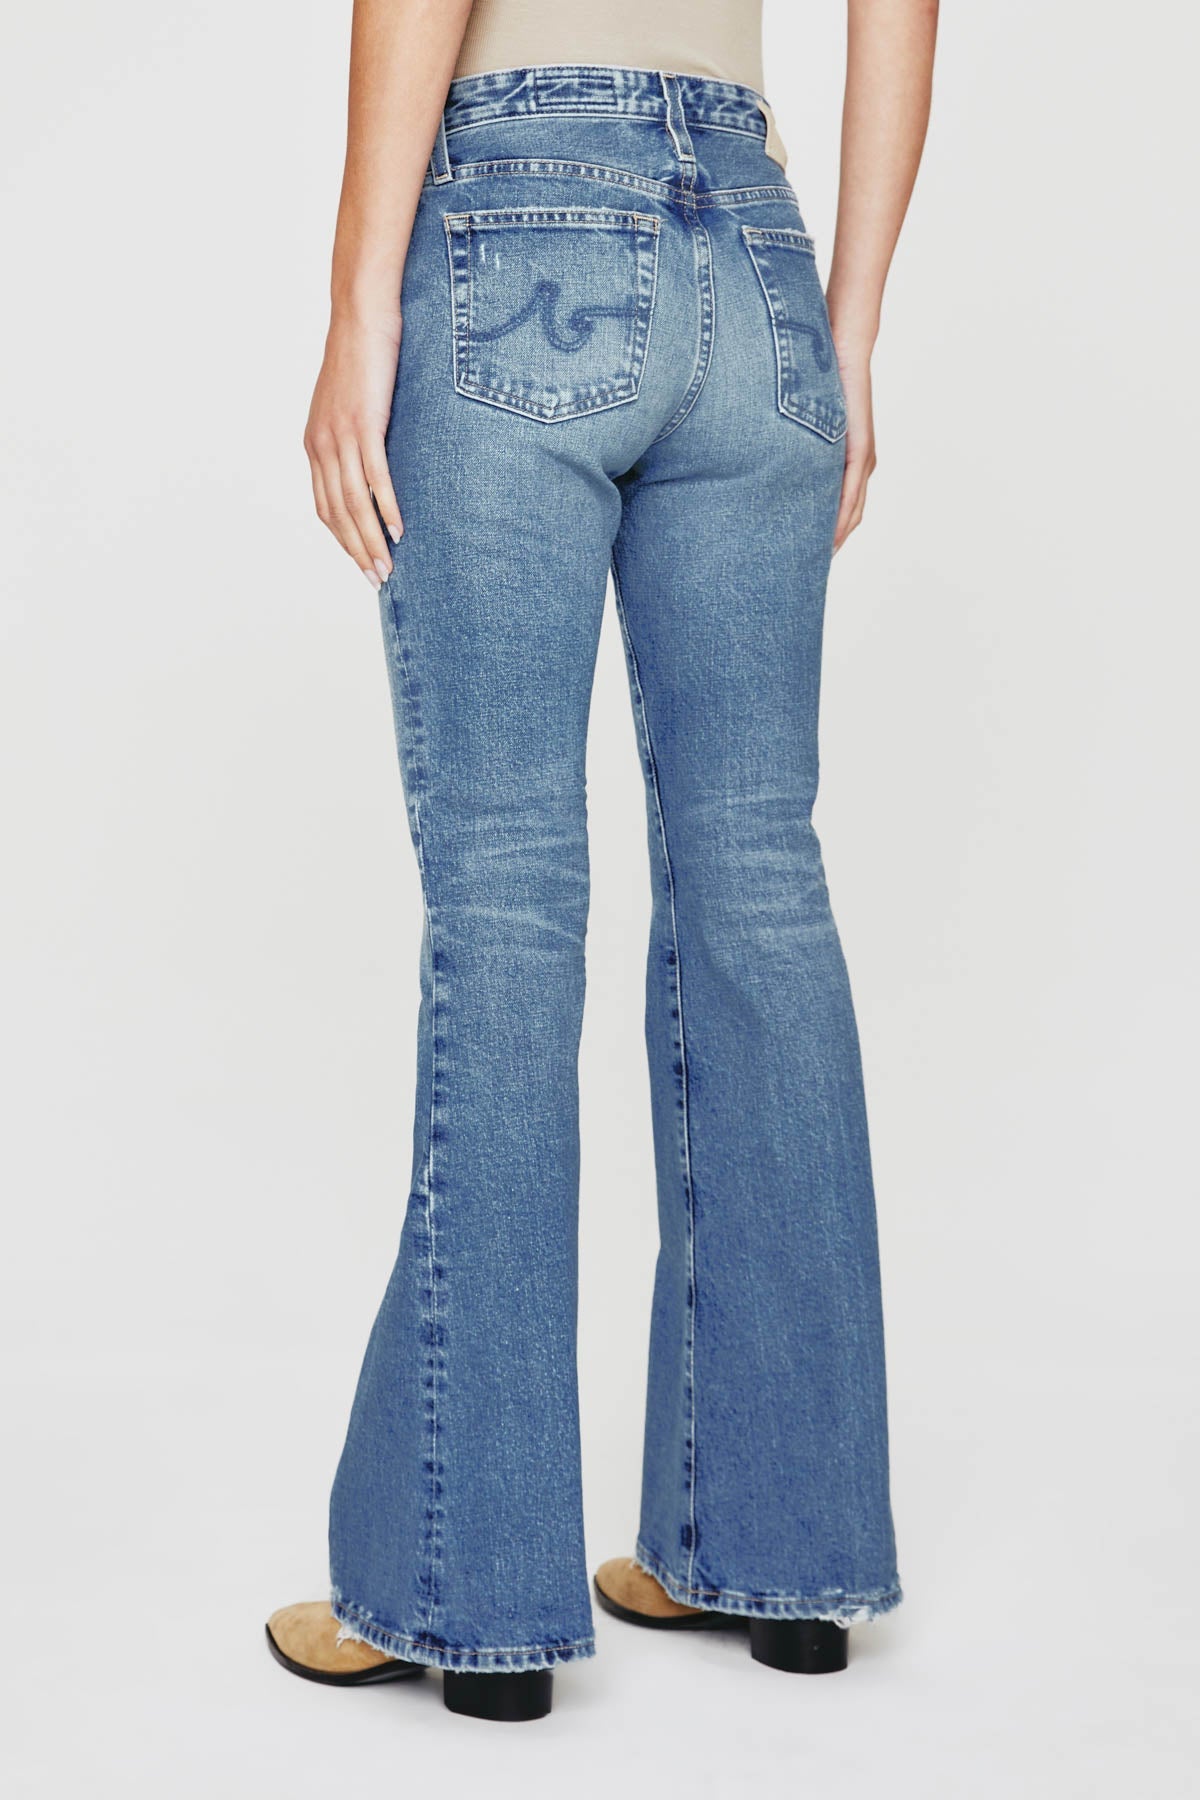 Angeline Mid Rise Flare Jean - AG Jeans - Danali - VBS1D76UB-16YCUO-25